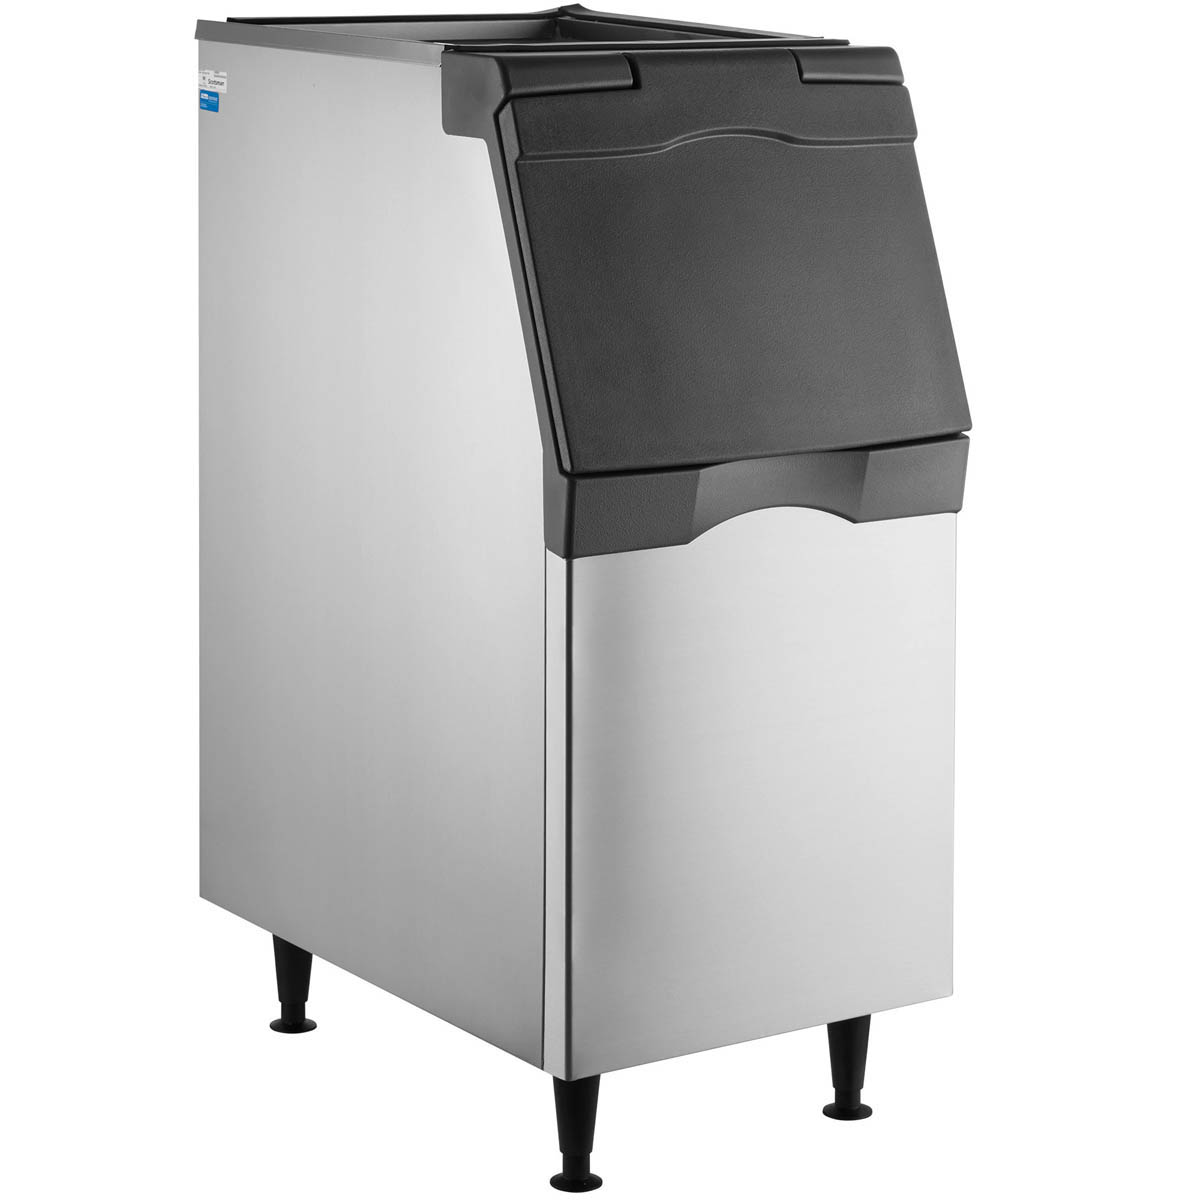 With Scotsman B322S Is An Effective Way To Keep Your Ice Supply Cool and Available, Chef's Deal